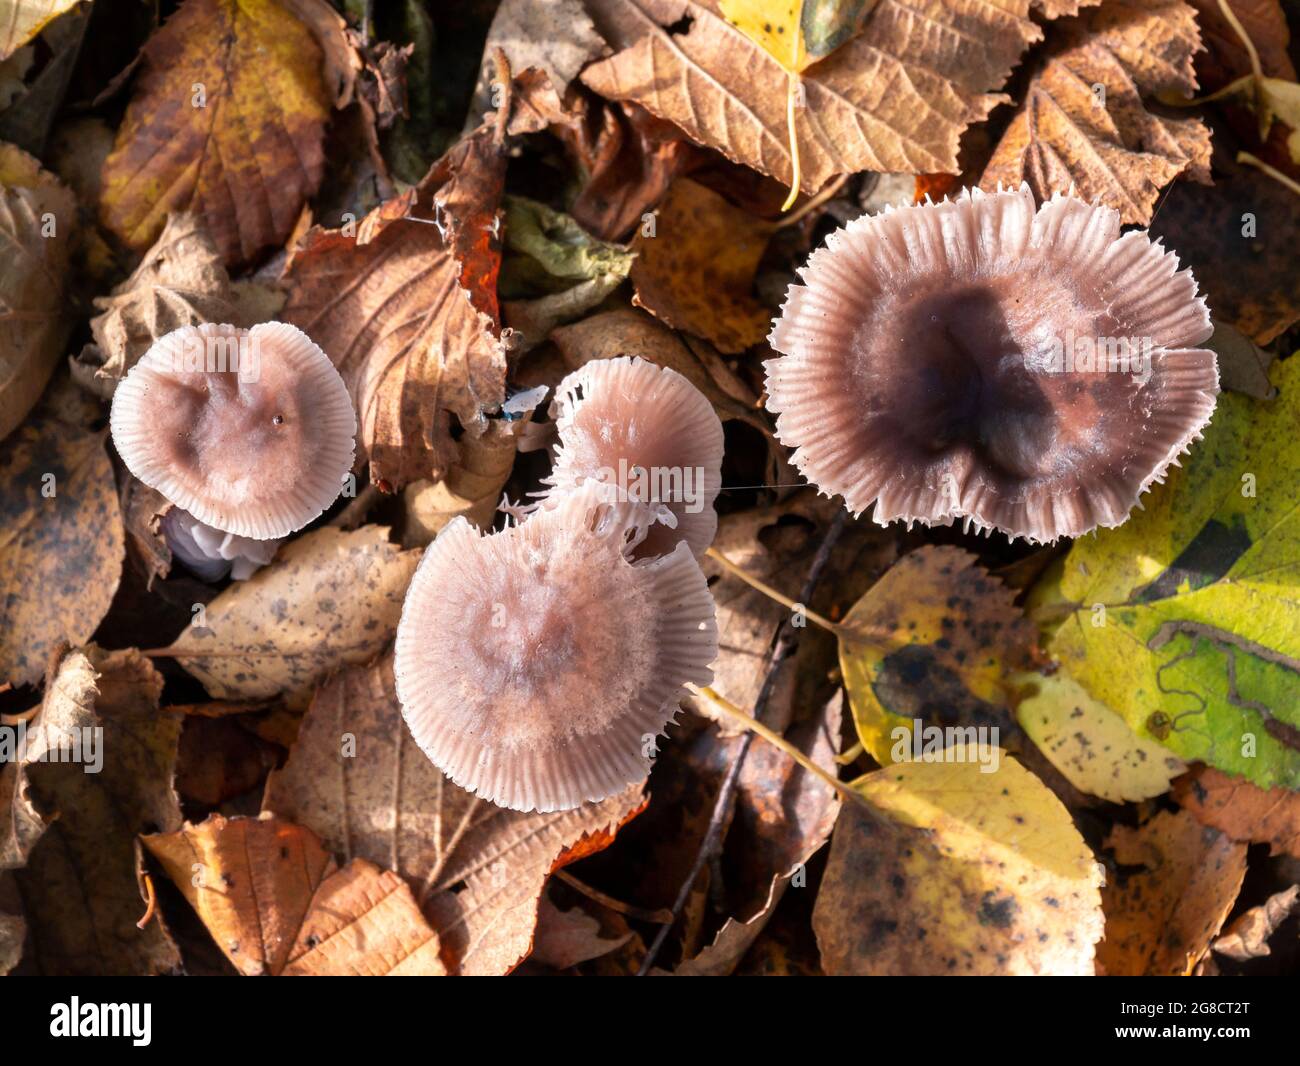 Top view of caps of lilac bonnet, Mycena pura, poisonous fungi among fallen leaves in autumn, Netherlands Stock Photo